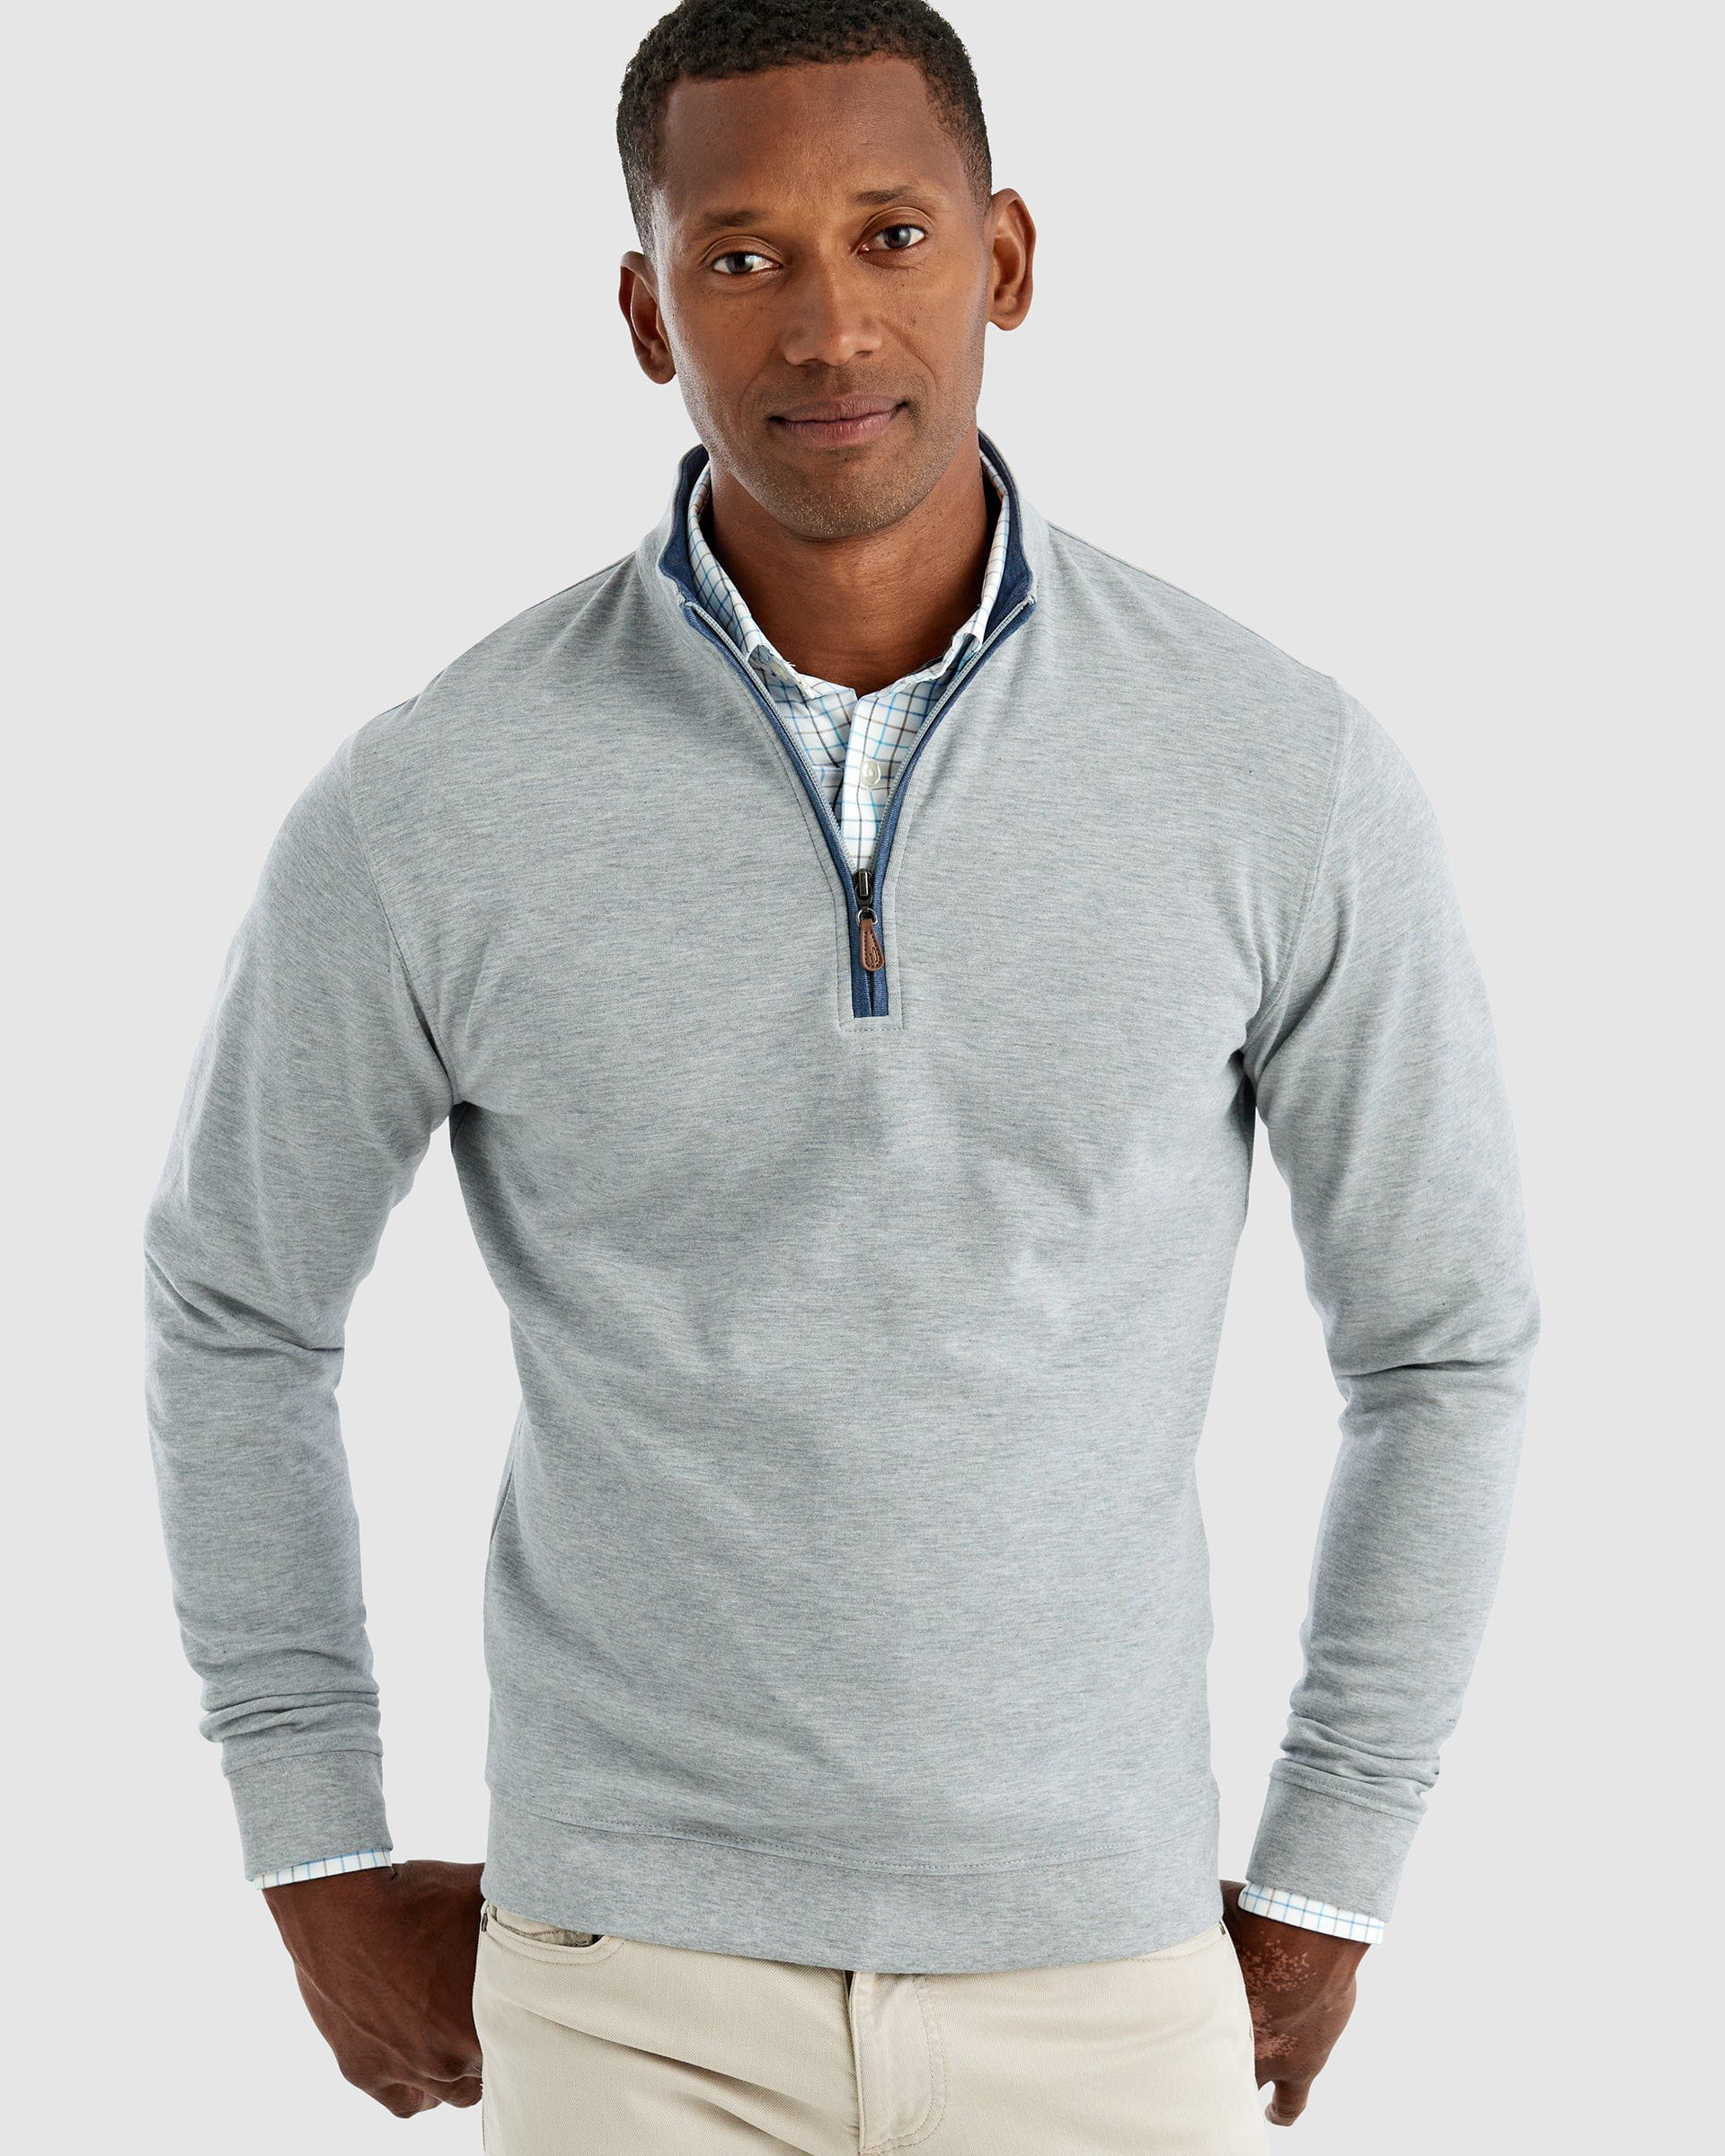 Pullover Zip Johnnie Sully 1/4 O